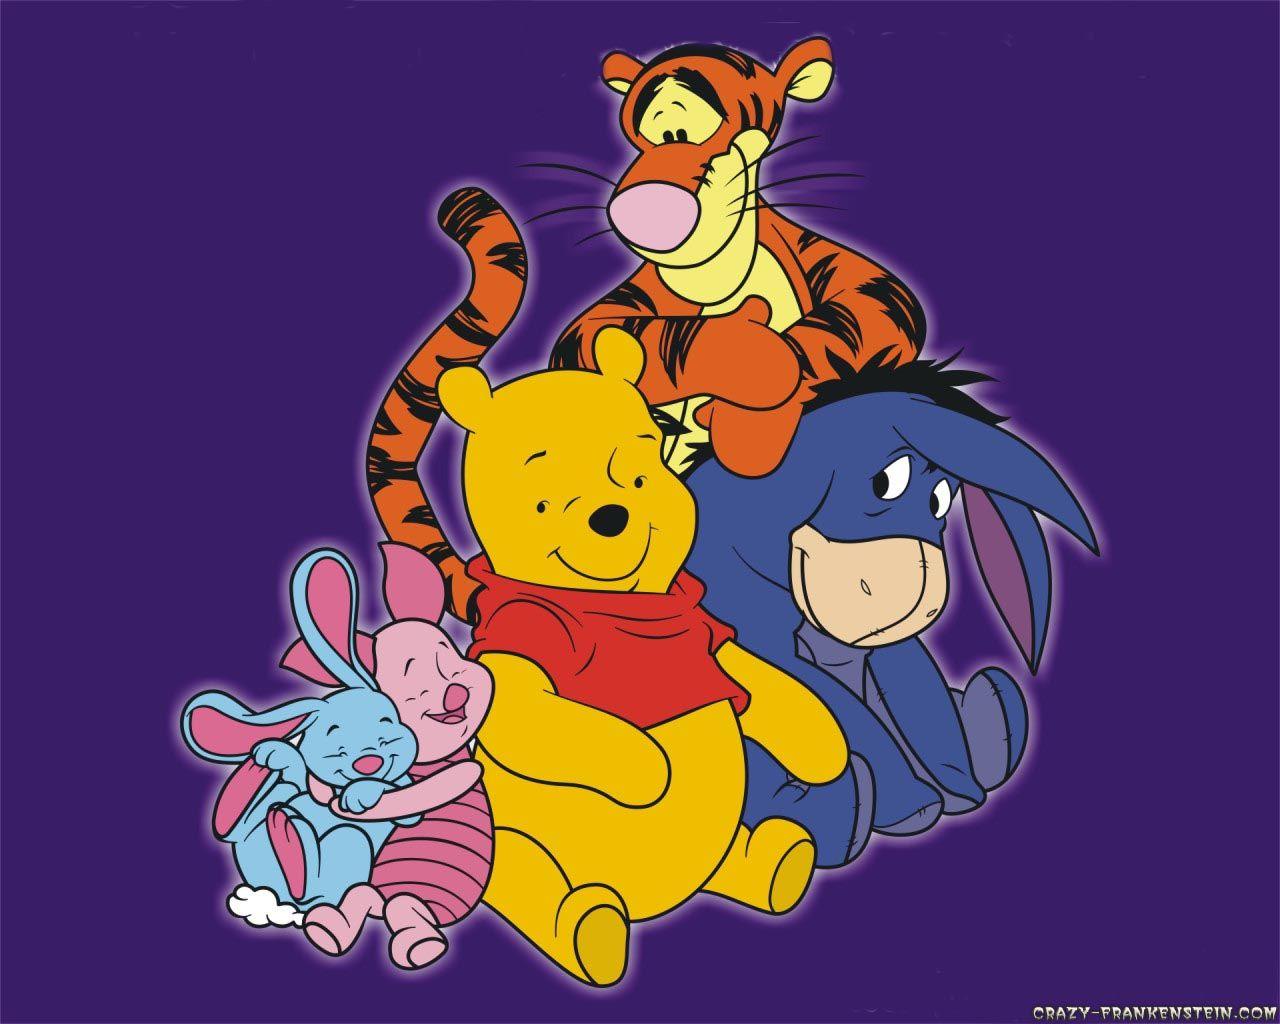 pooh and friends. wallpaper Display Pooh And Friends